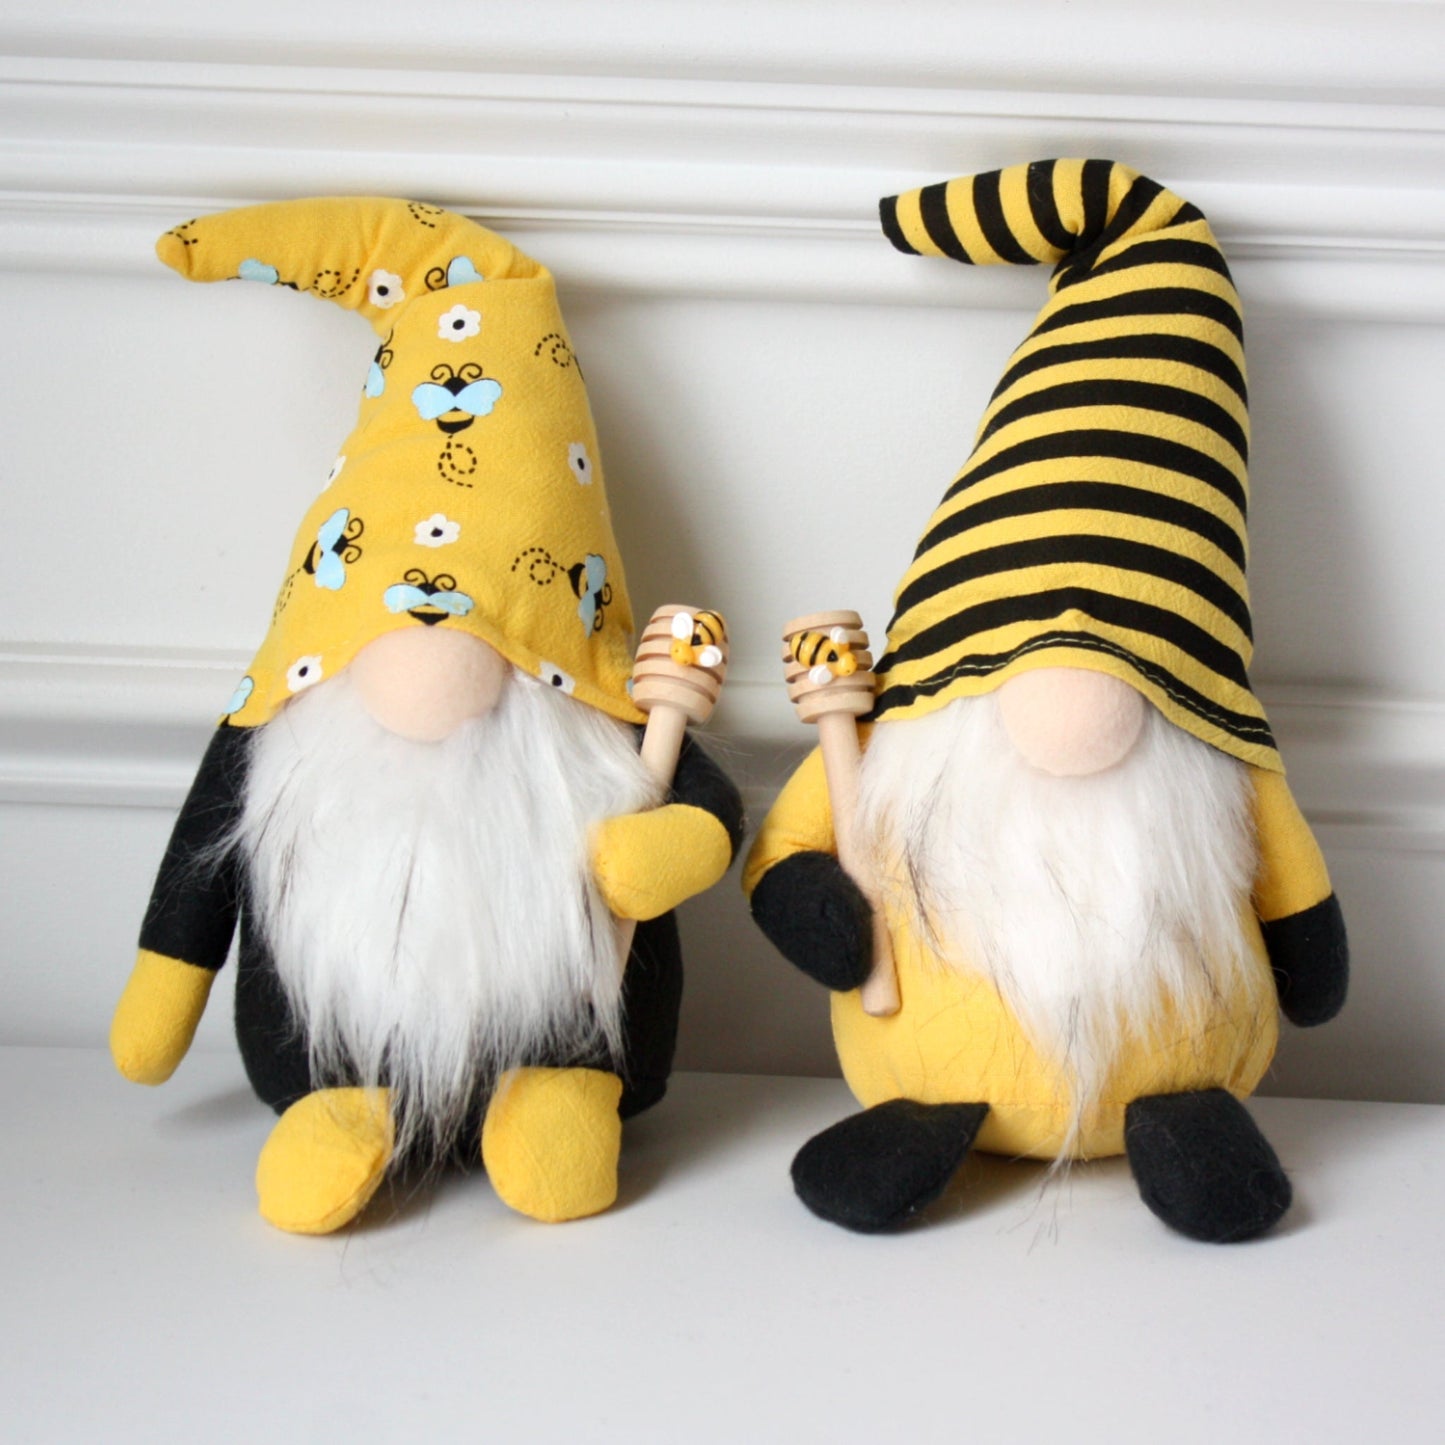 Pair of Handmade Bee Gnome Brothers - Made in the USA